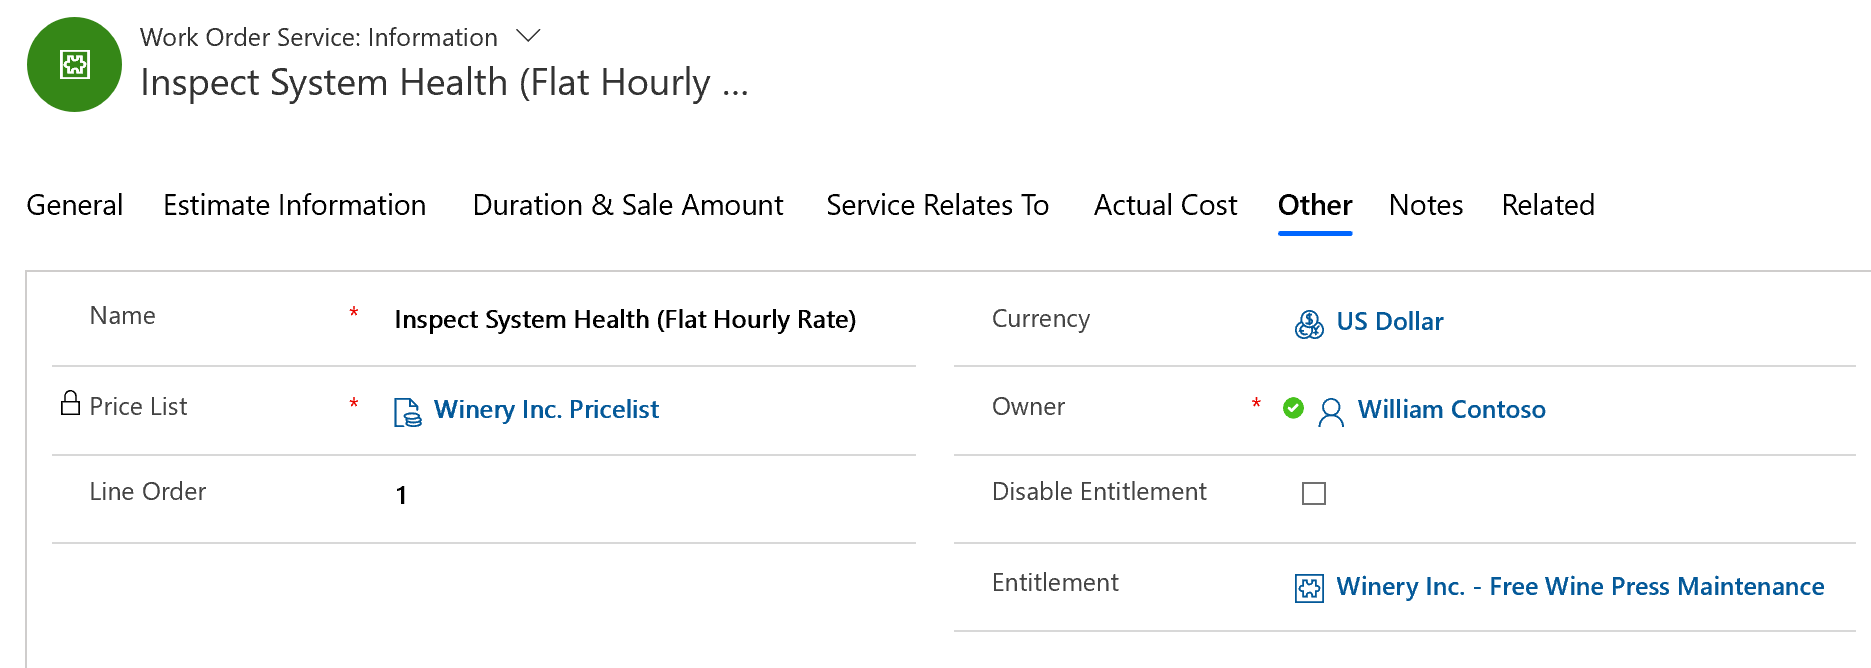 Screenshot of entitlement applied to the work order service.